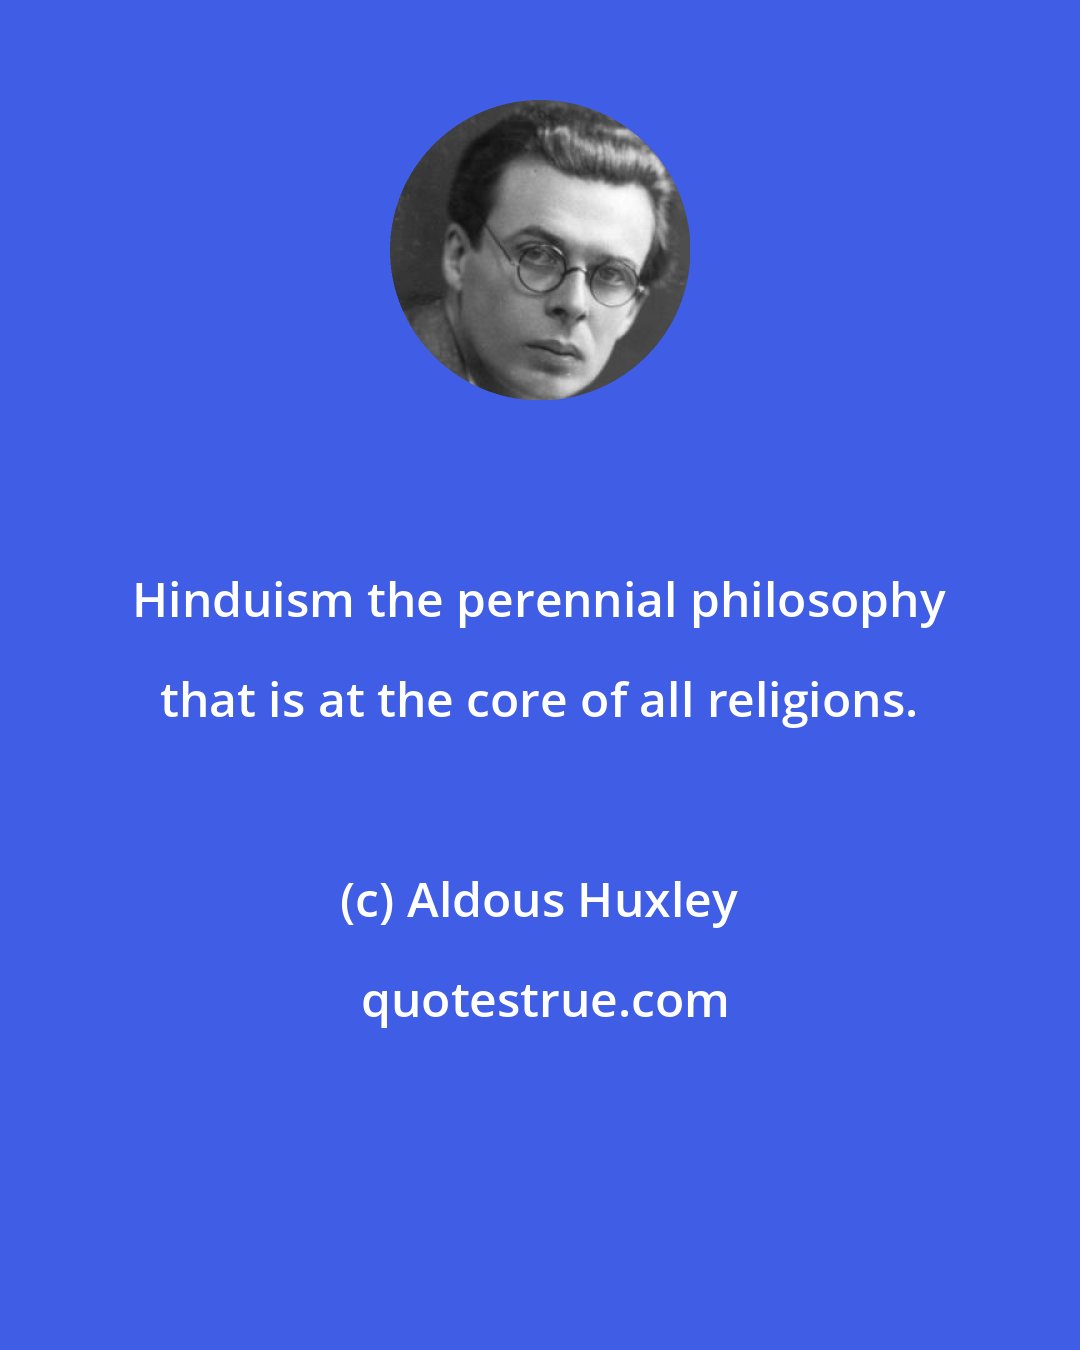 Aldous Huxley: Hinduism the perennial philosophy that is at the core of all religions.